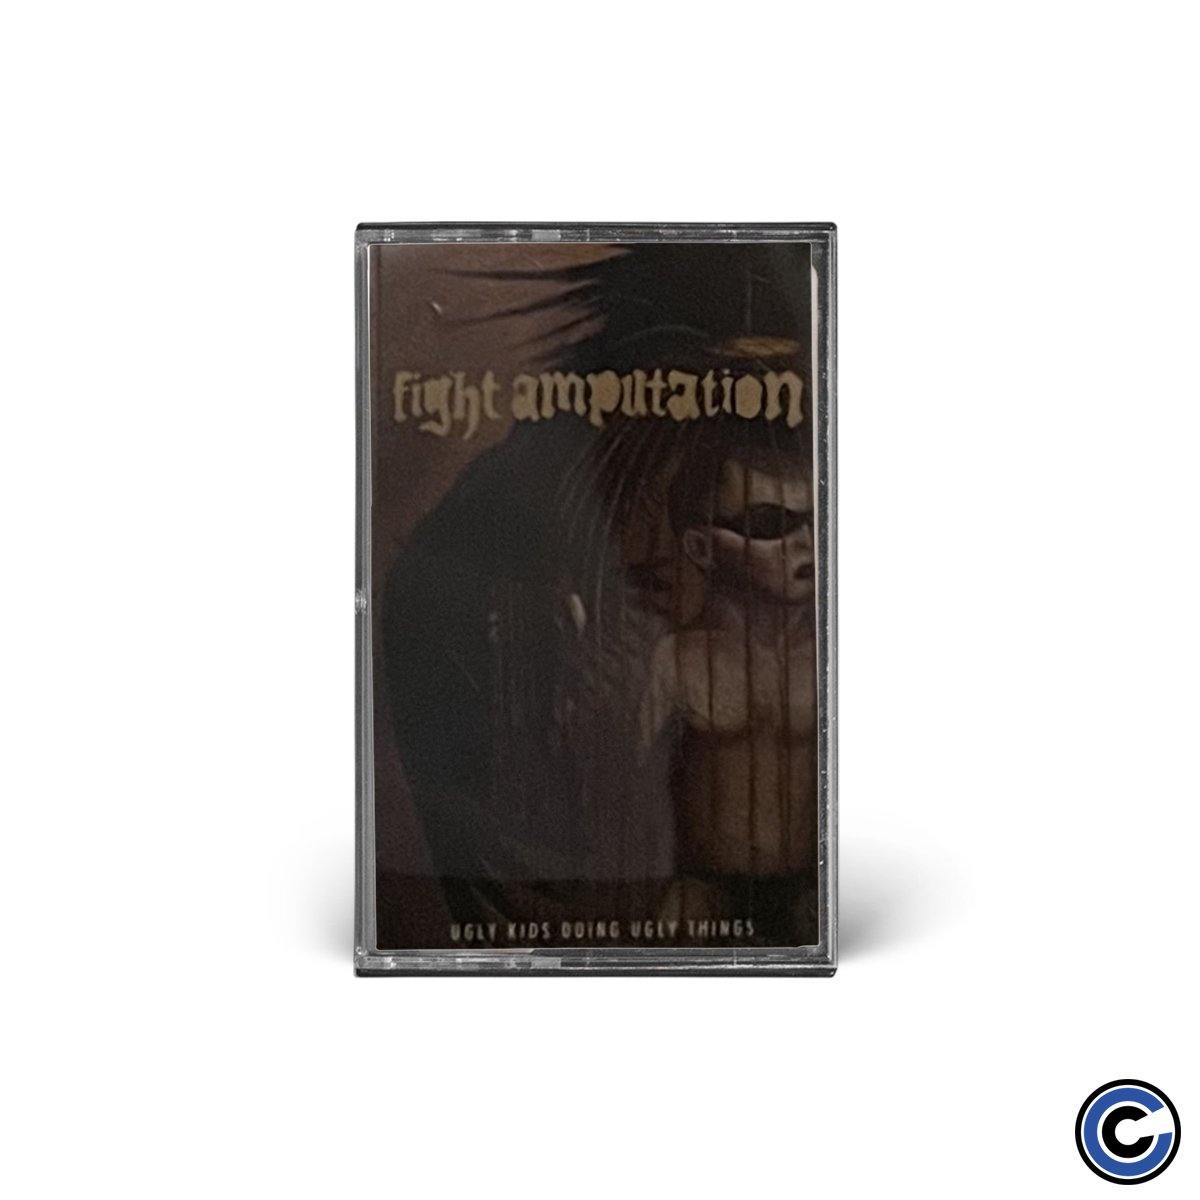 Buy – Fight Amp "Ugly Kids Doing Ugly Things" Cassette – Band & Music Merch – Cold Cuts Merch